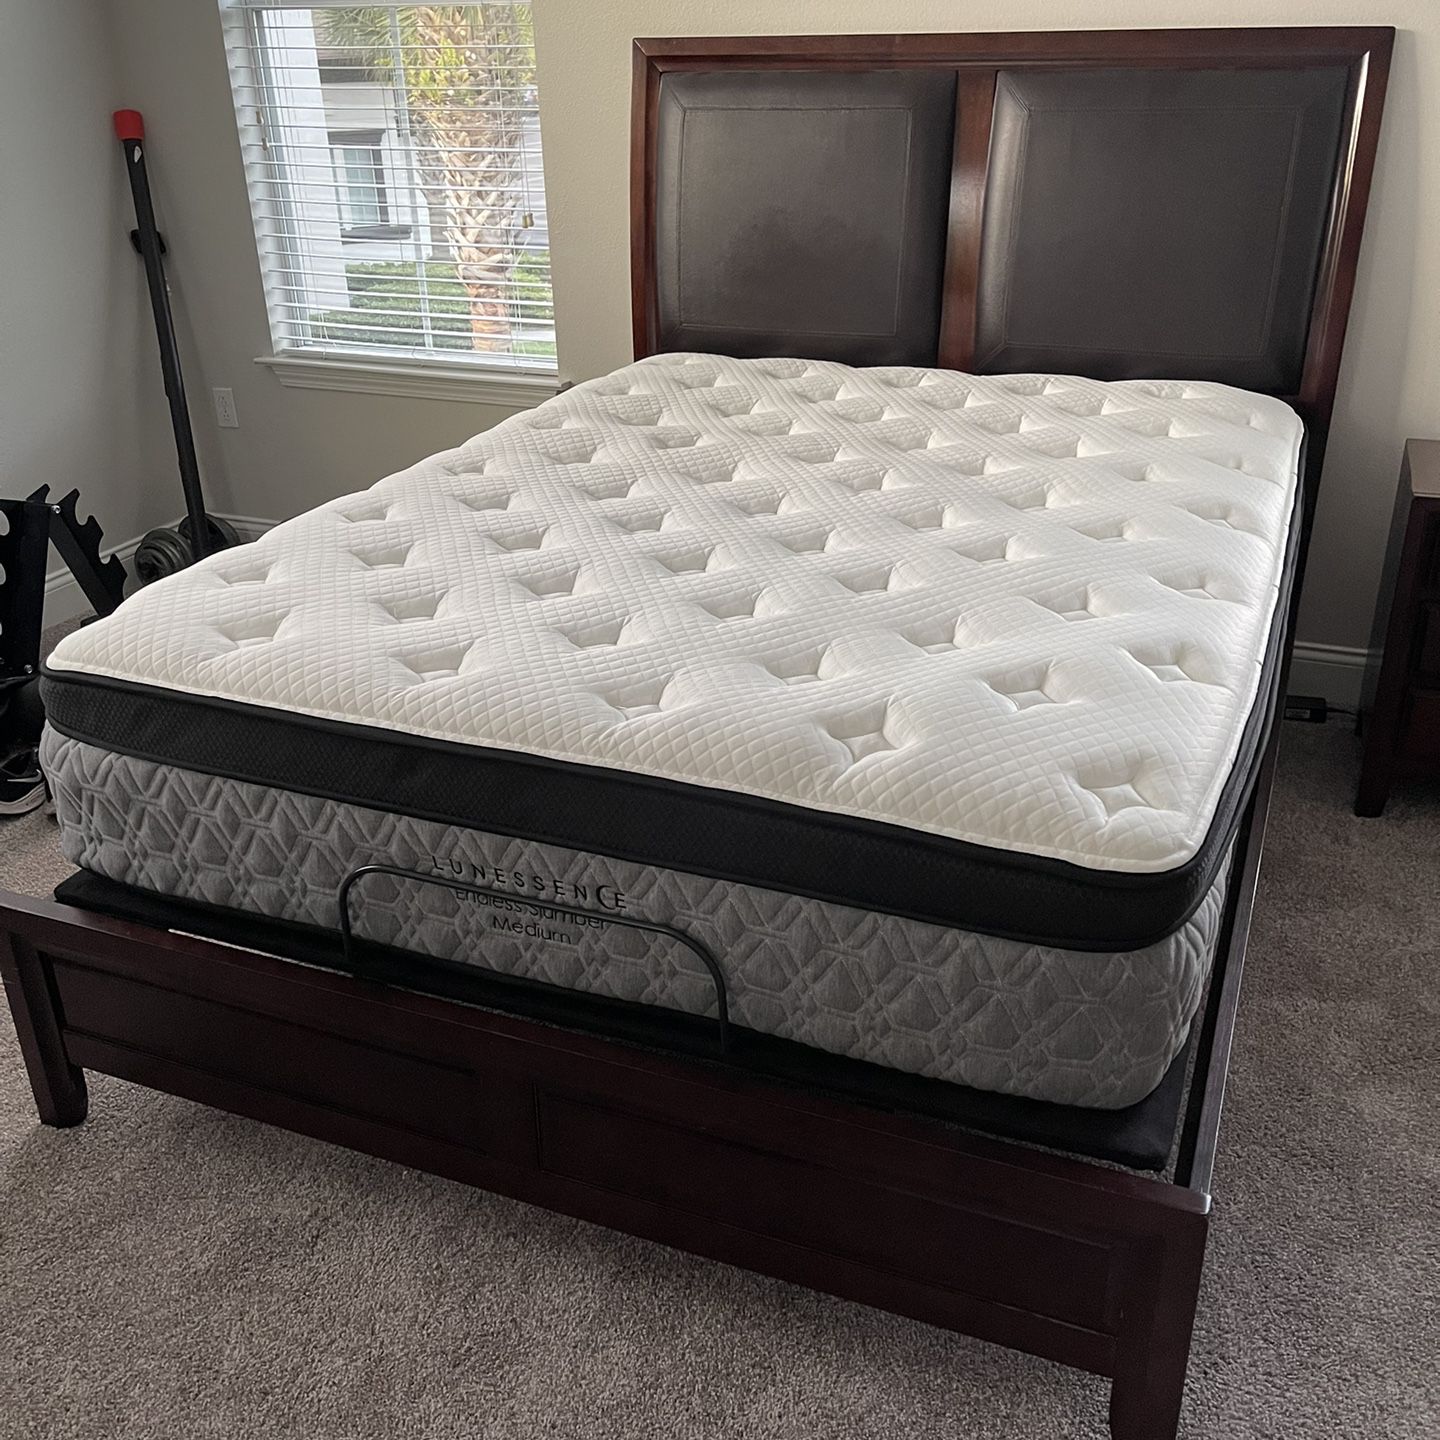 BRAND NEW Mattress Clearance Event All Sizes Available Only $40 Down